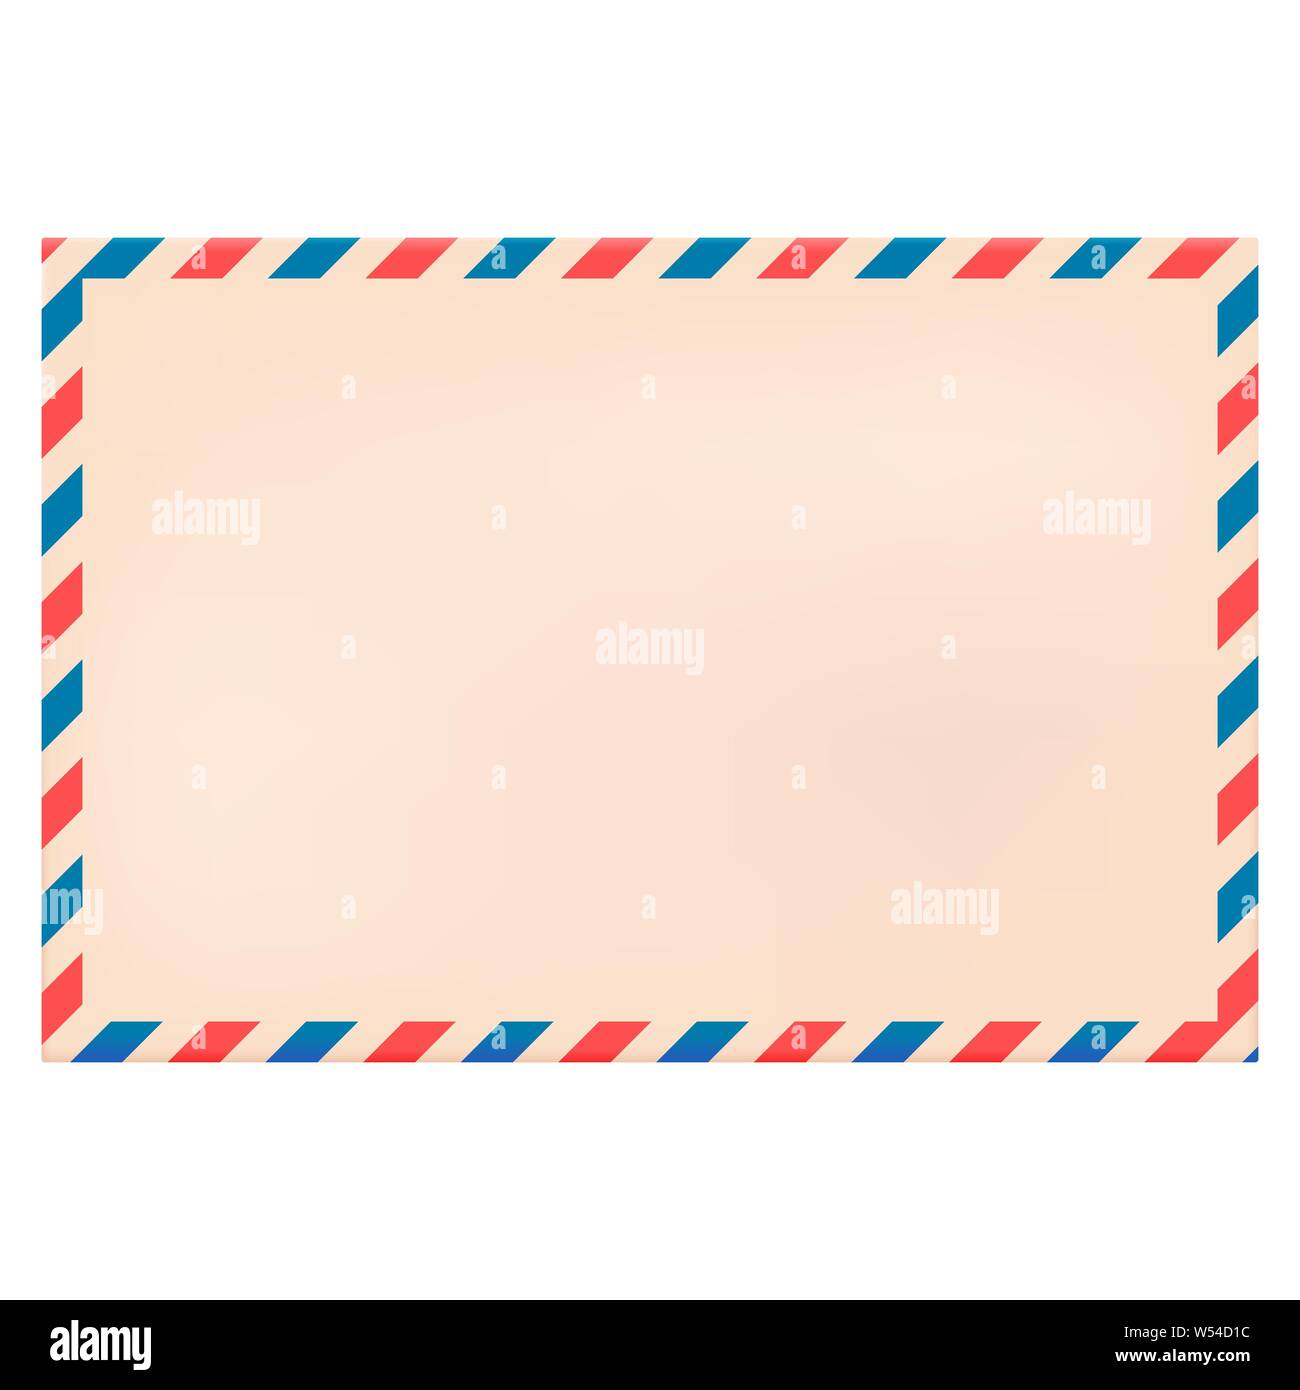 Pink Striped Border: Clip Art, Page Border, and Vector Graphics